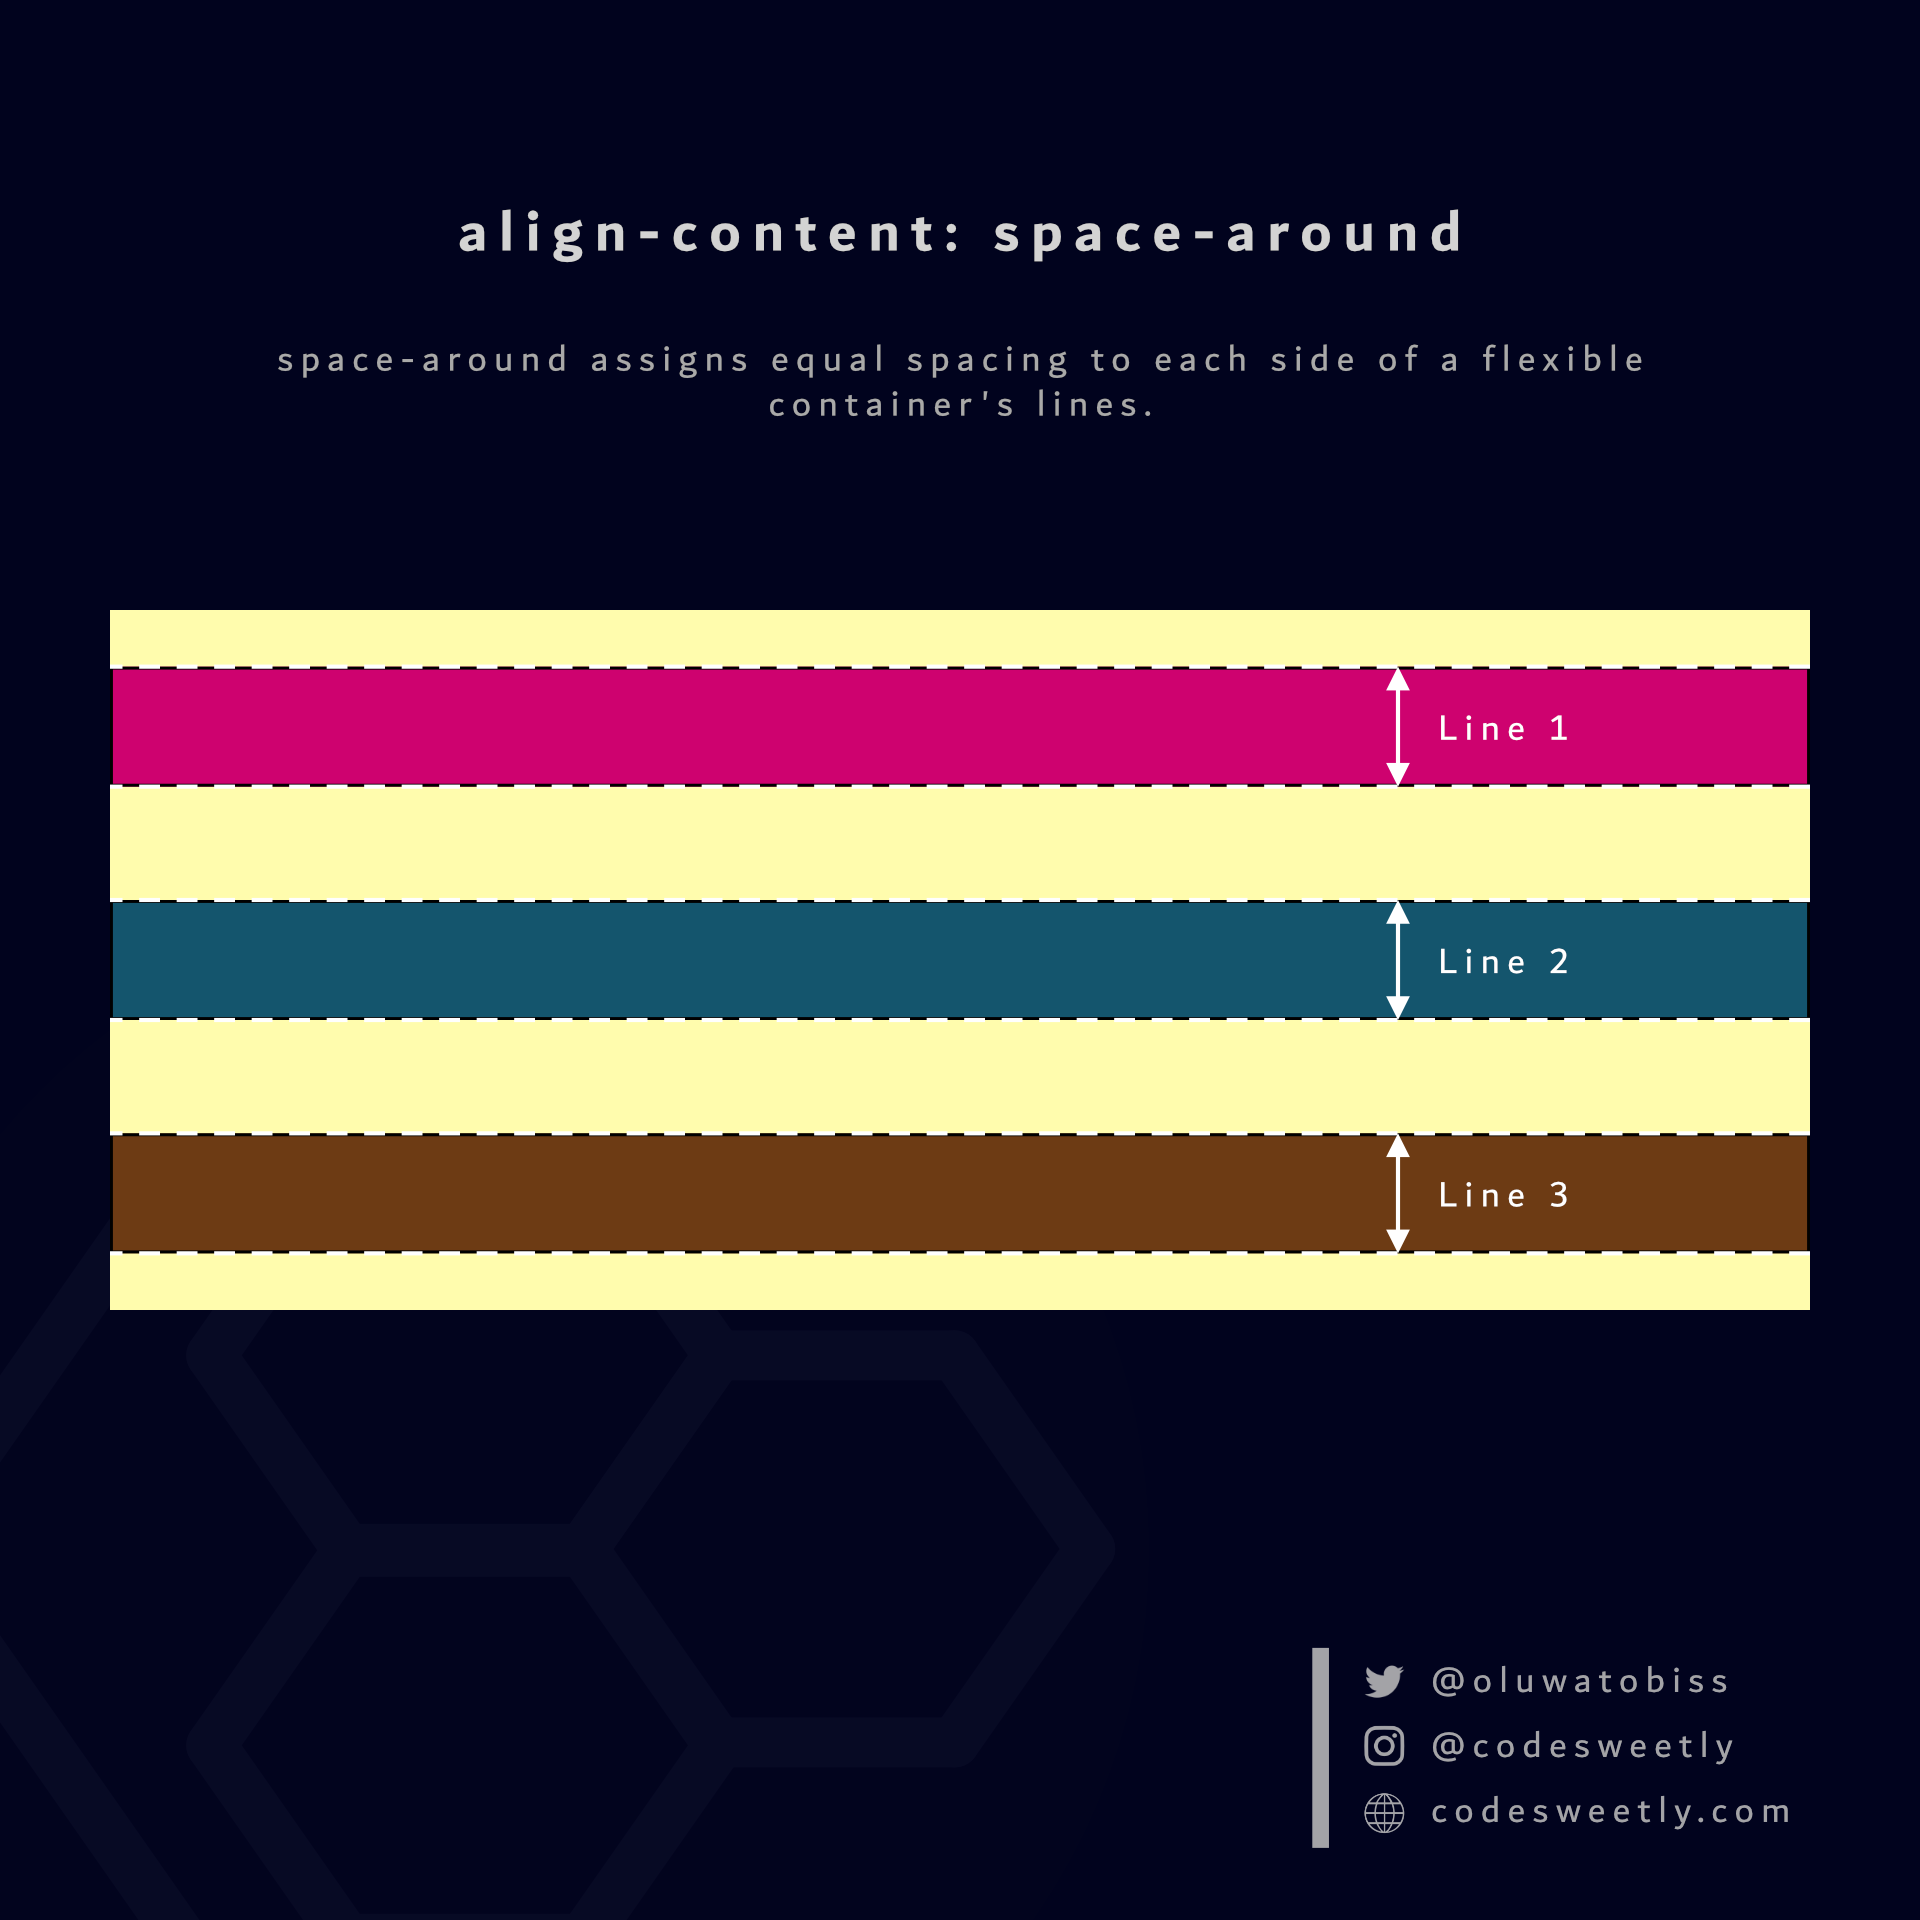 Illustration of align-content's space-around value